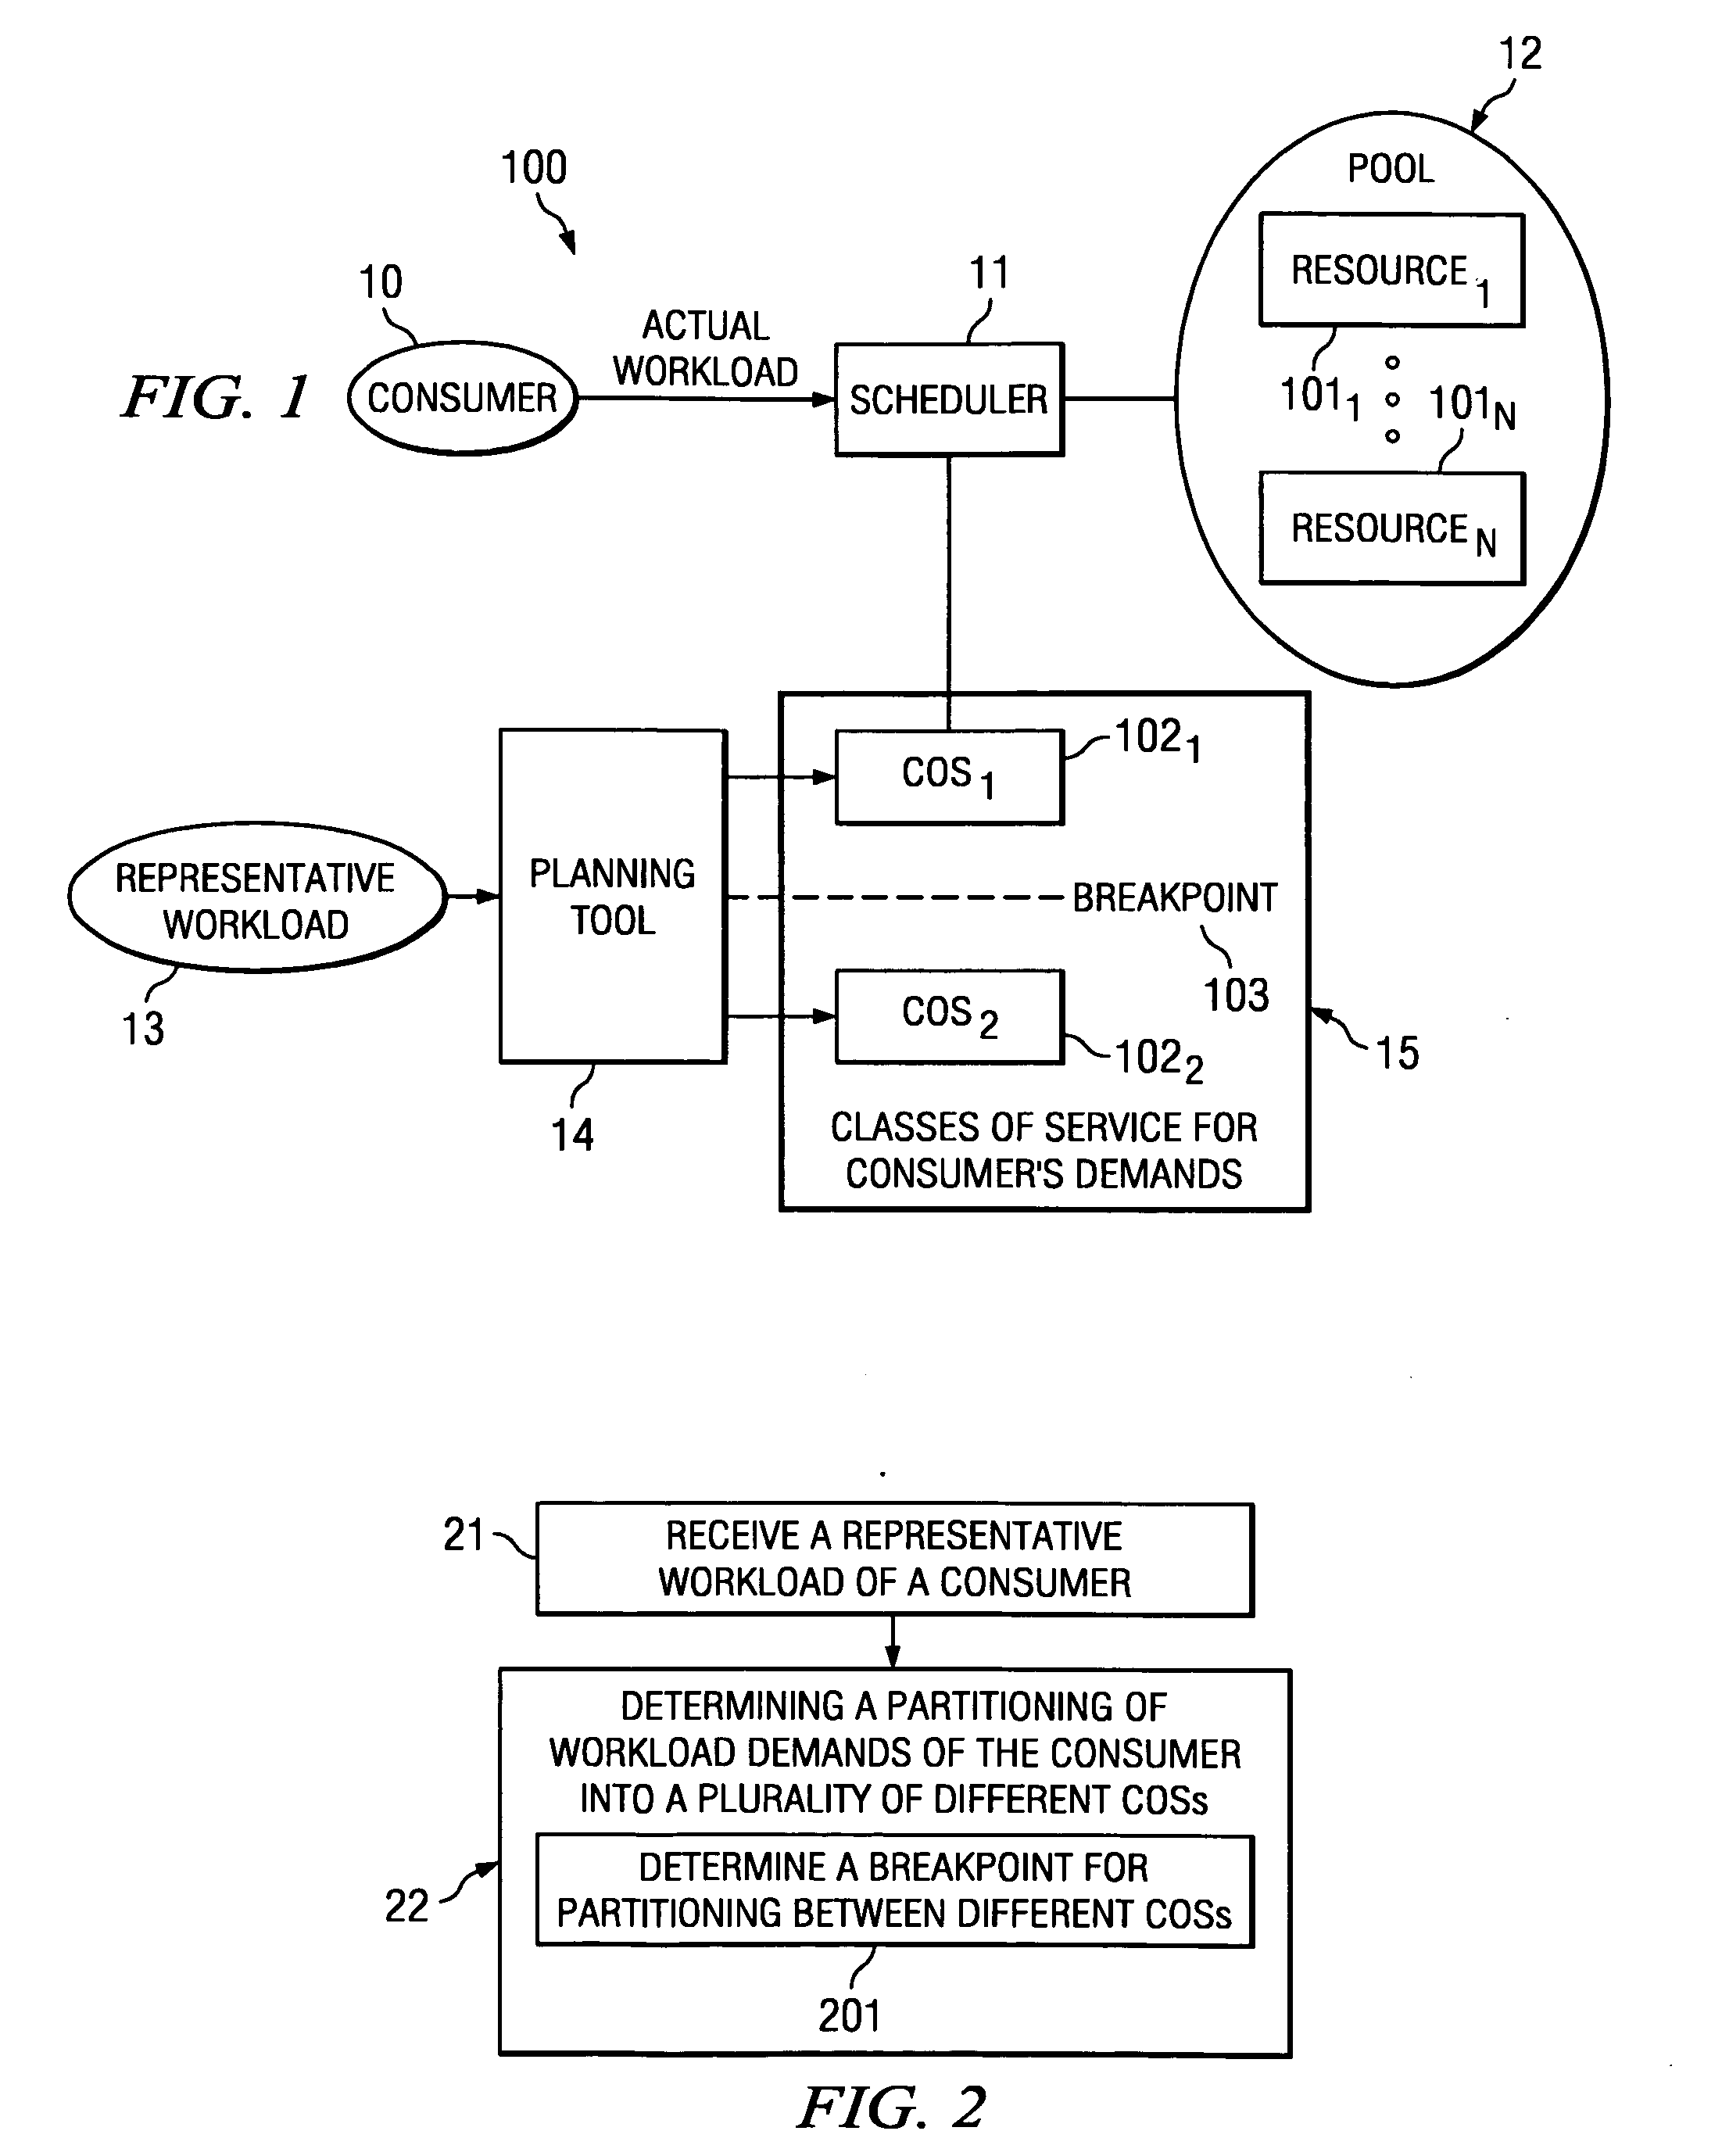 System and method for determining a partition of a consumer's resource access demands between a plurality of different classes of service